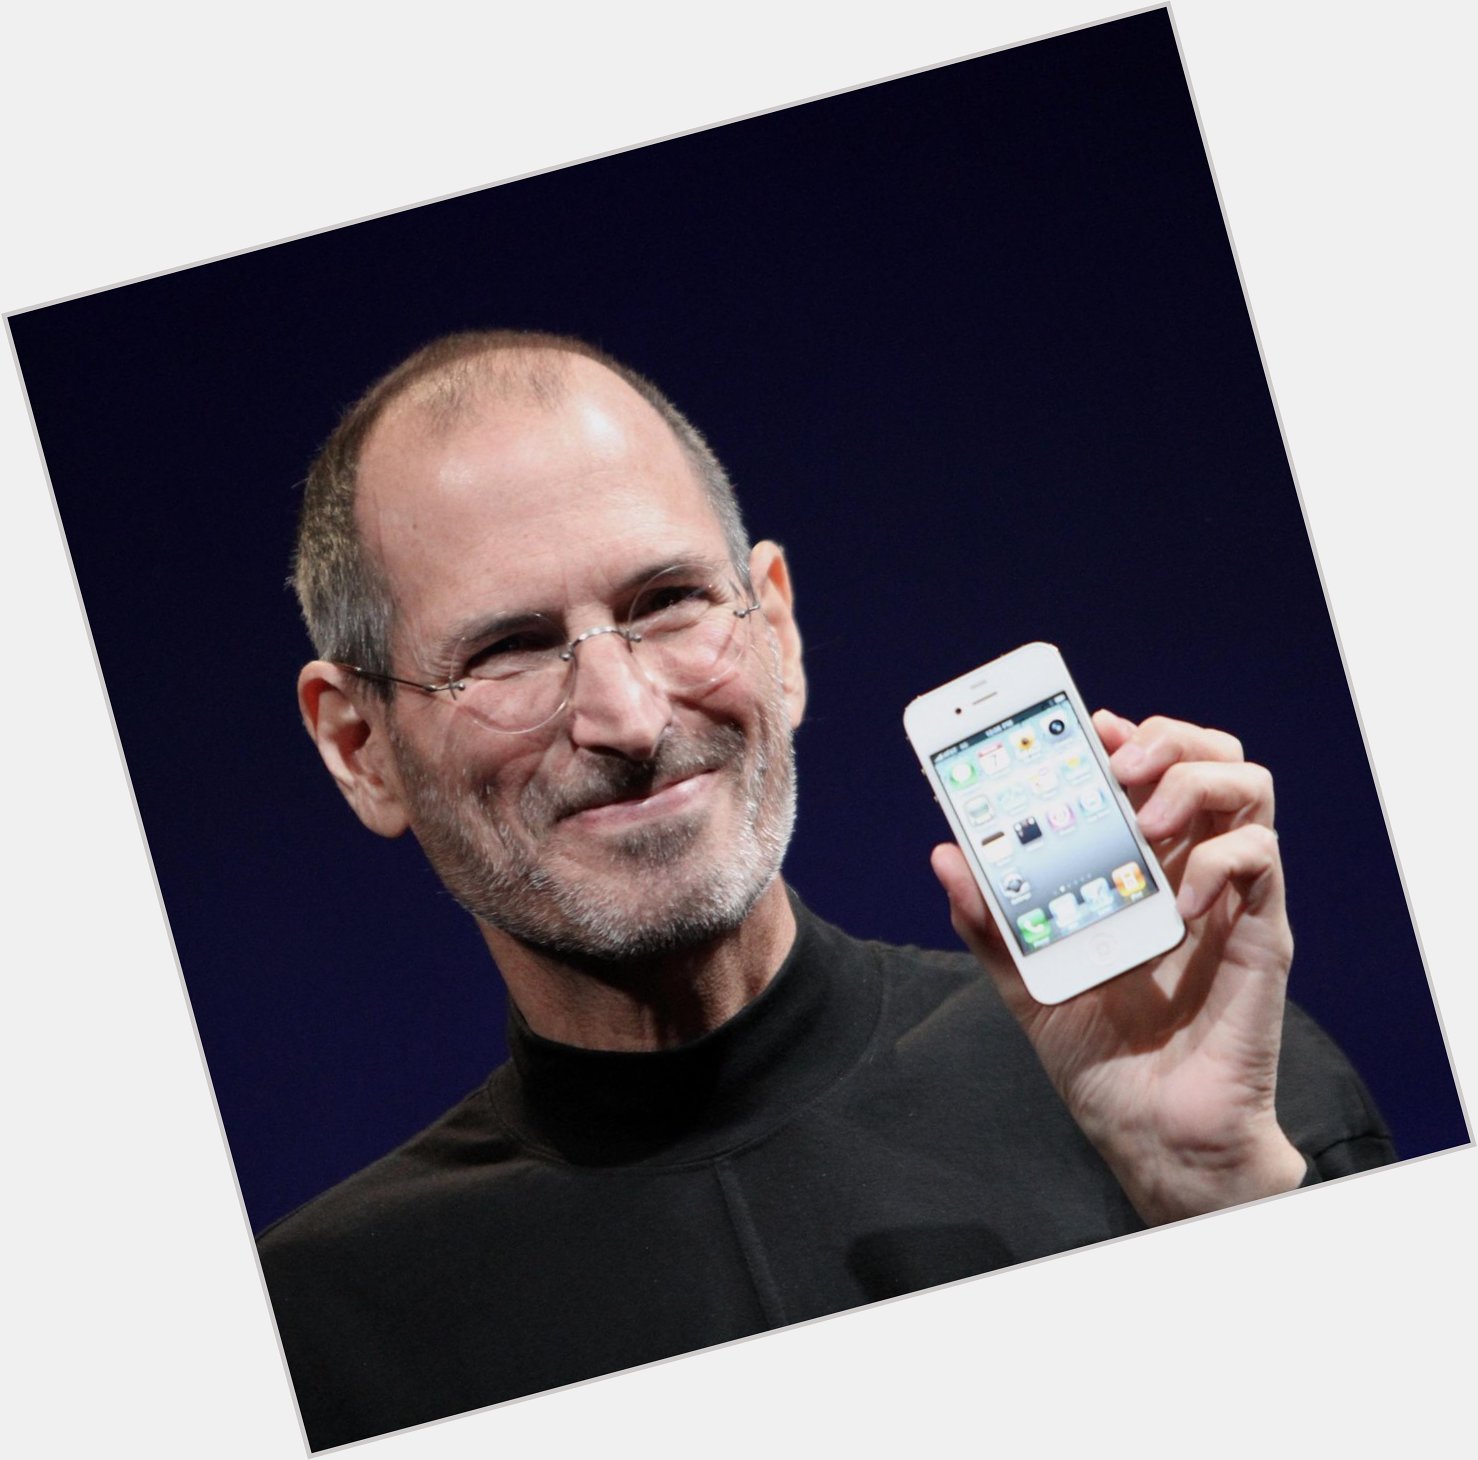 Today in Geek History: Stay hungry. Stay foolish. Happy birthday, Steve Jobs! 